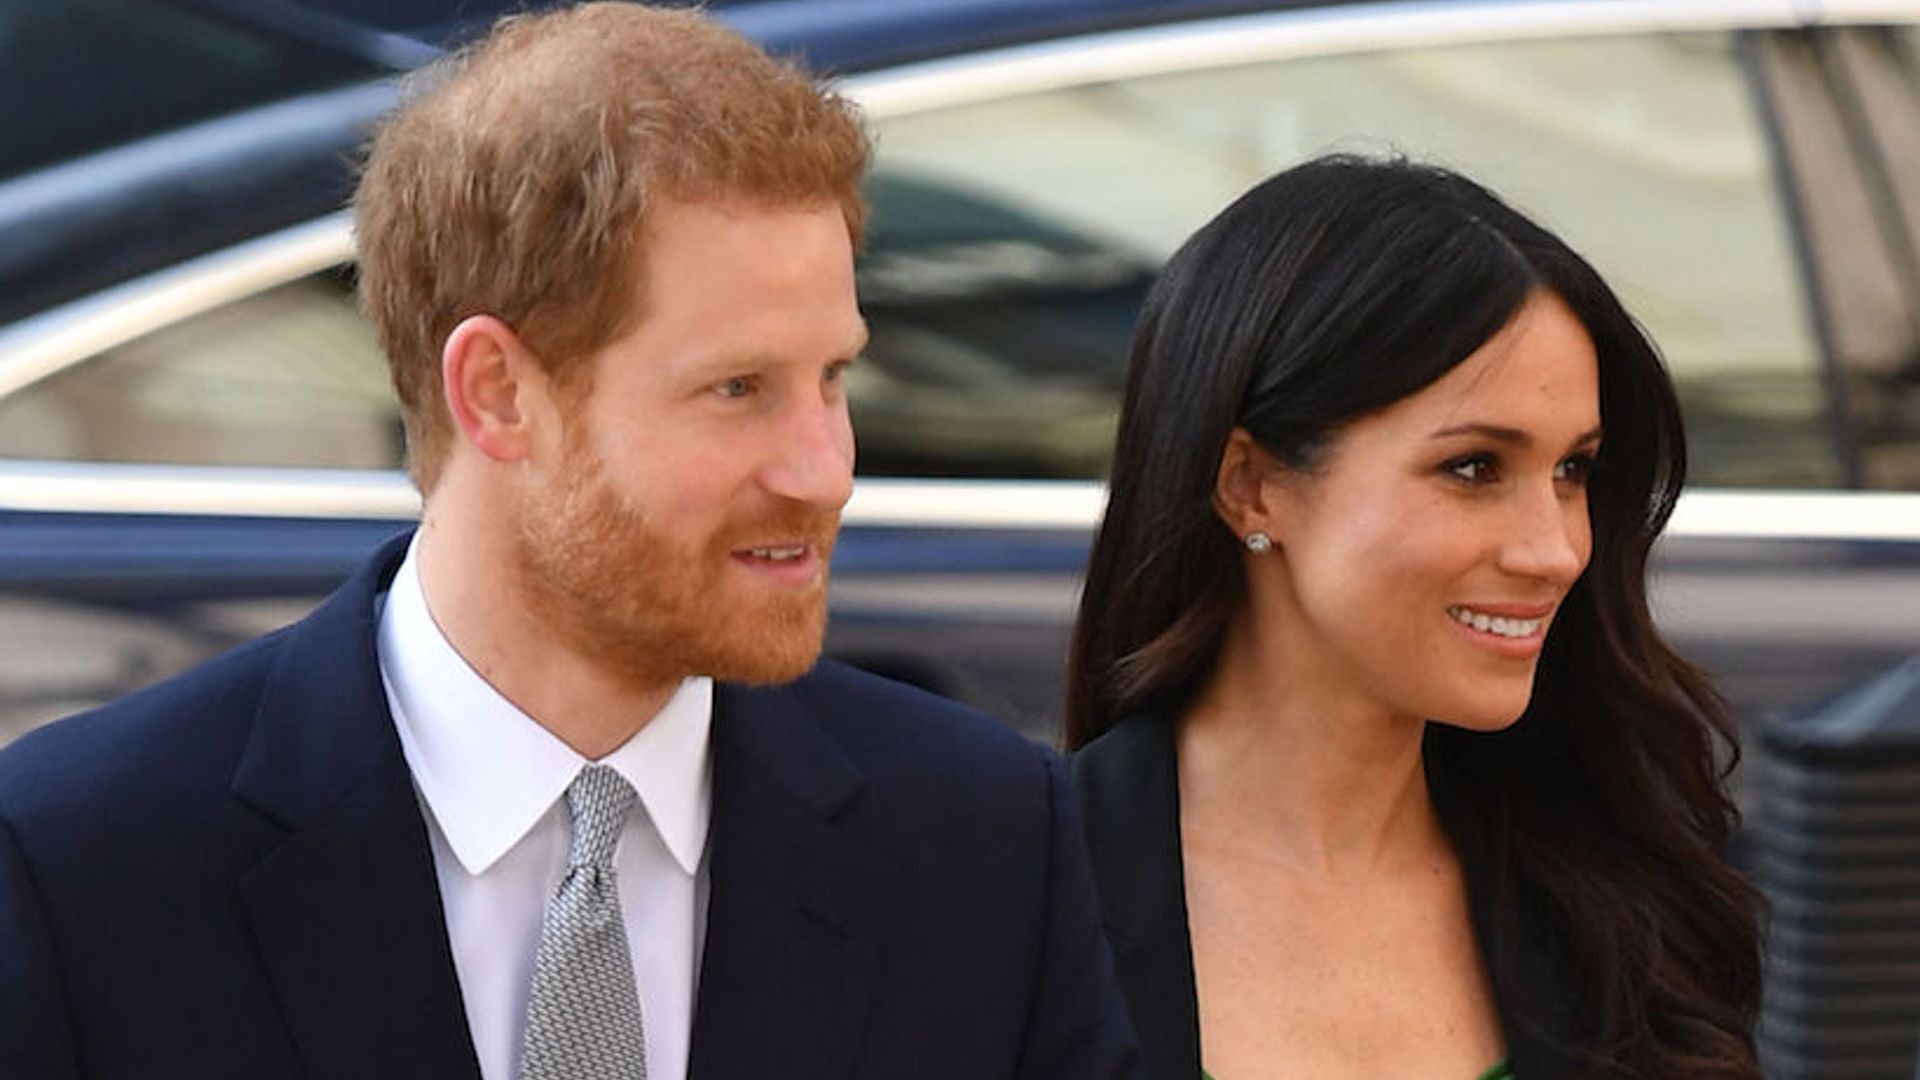 Only a month to go! Prince Harry and Meghan Markle step out for a particularly special event